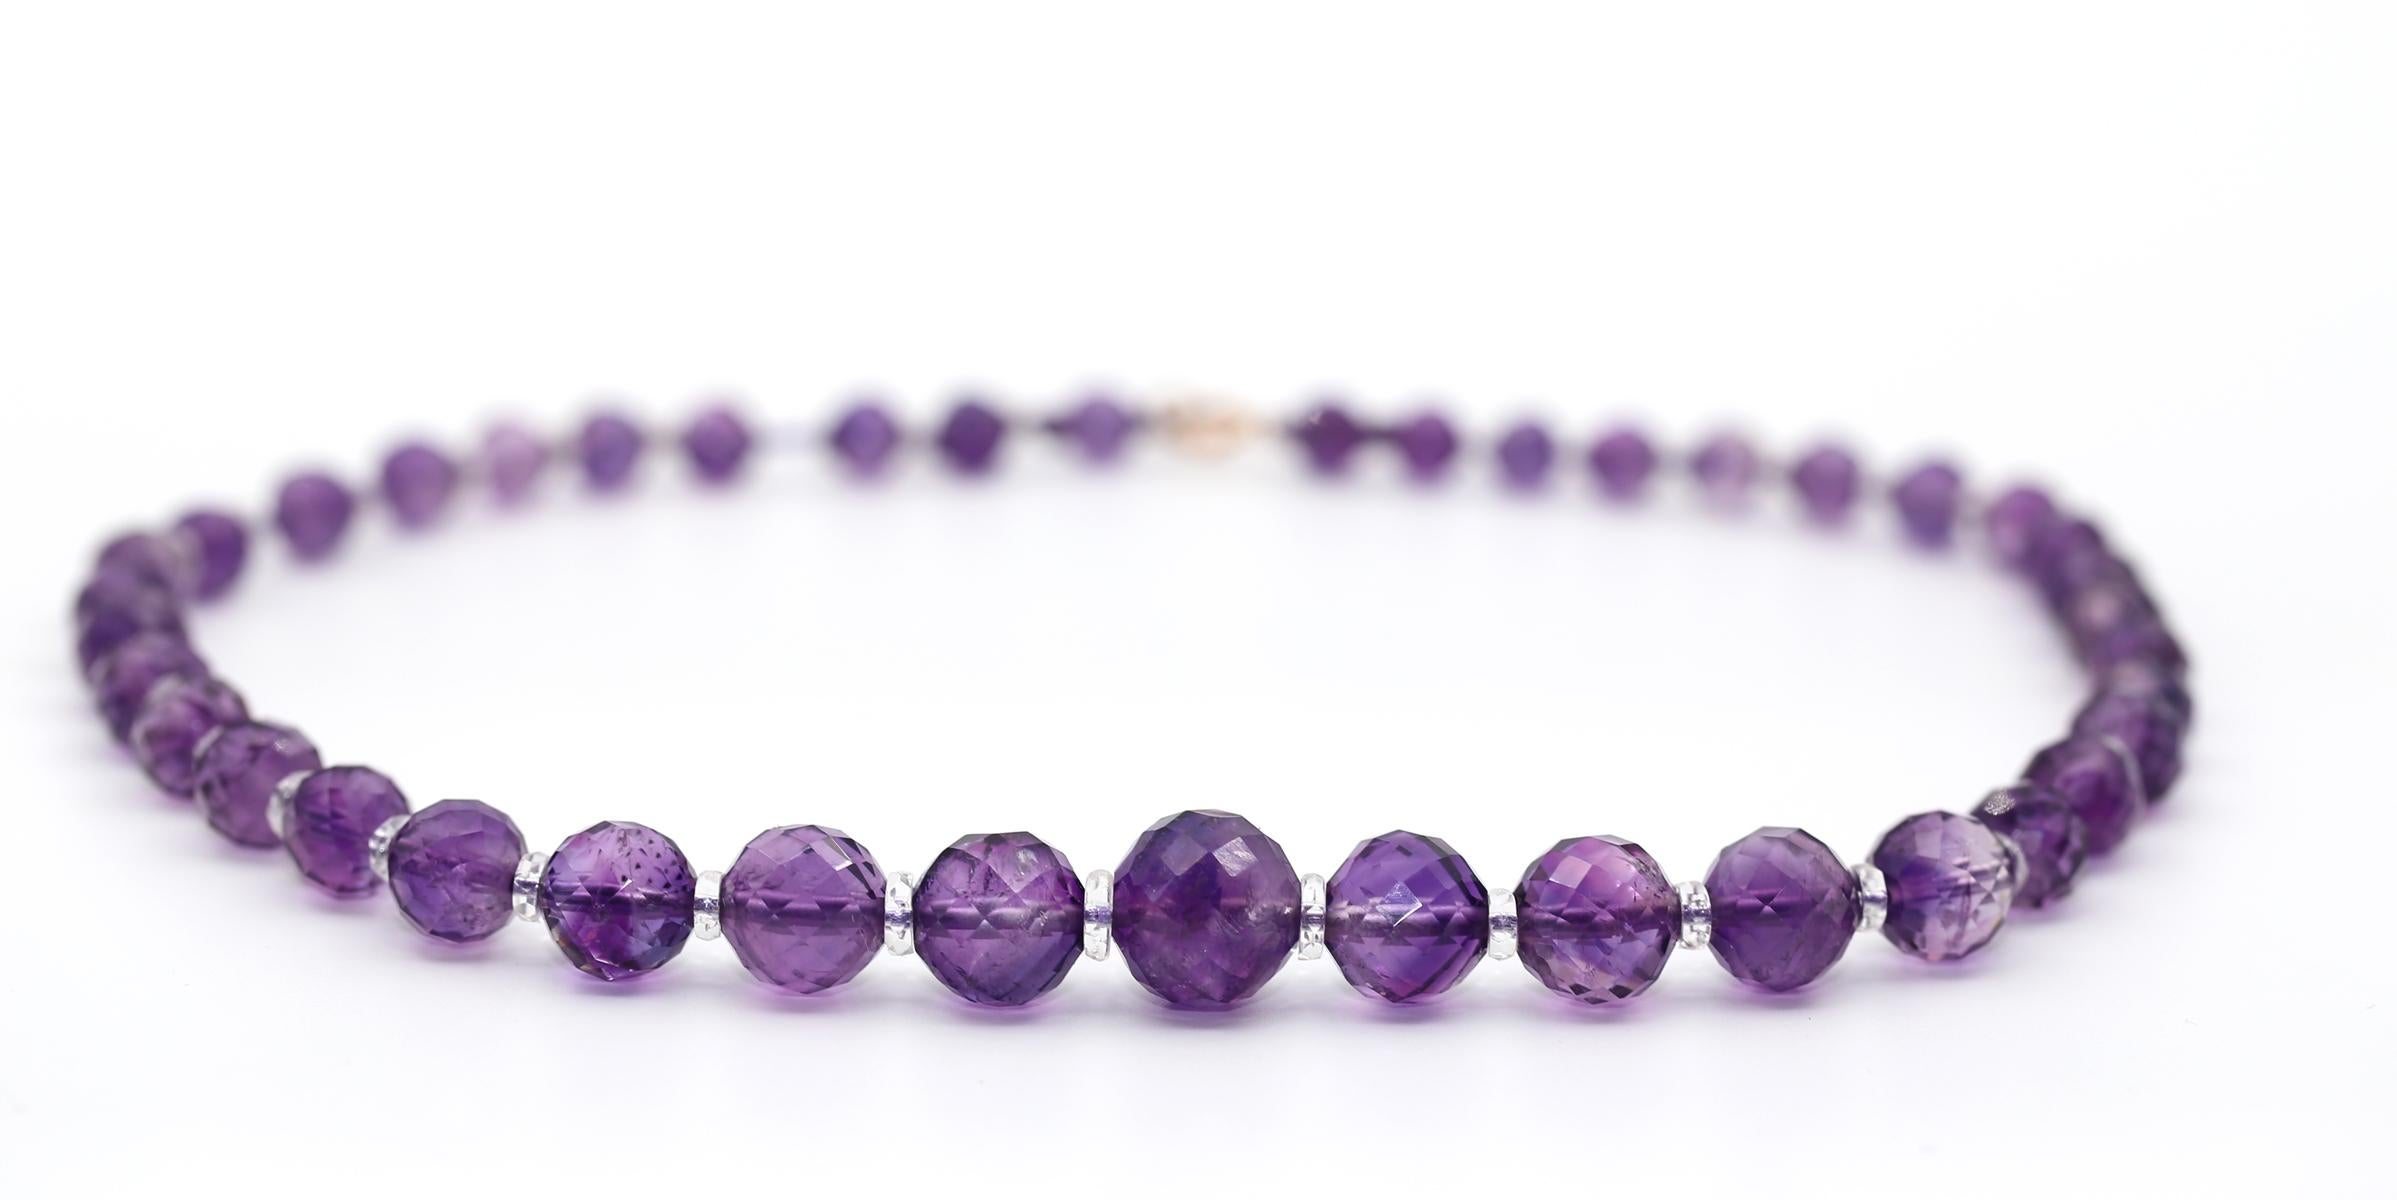 Amethyst and Rock Crystal Necklace. Created in 
Fine Amethyst Necklace with yellow gold lock, comprising a row of faceted amethyst beads accented by rock crystal beads. No assay marks. The beads are organized in descending order from the center.